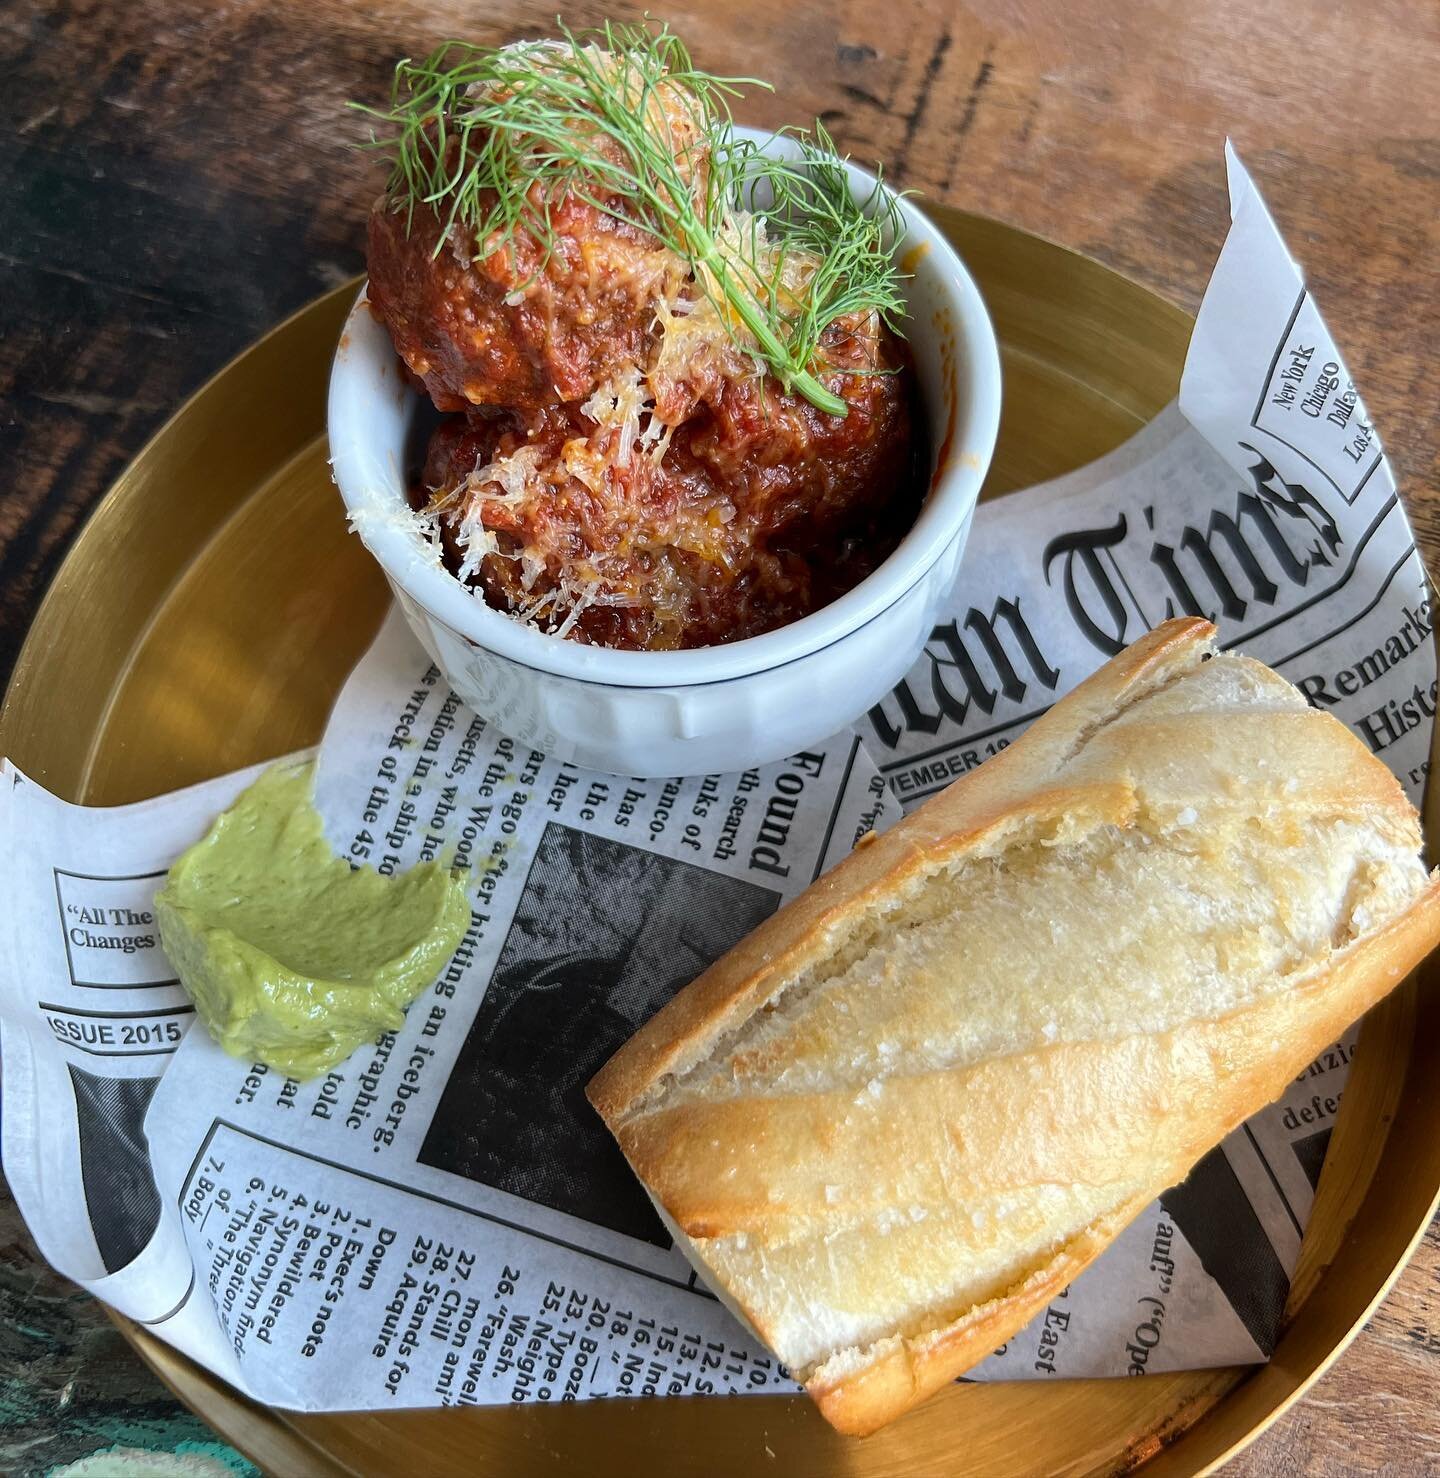 Damn Good Meatballs! Yup that&rsquo;s right! Made in house and ground fresh for us by @peakygrindershtx Served with some crunchy French baguette and topped with aged Parmesan 🤤🤤🤤